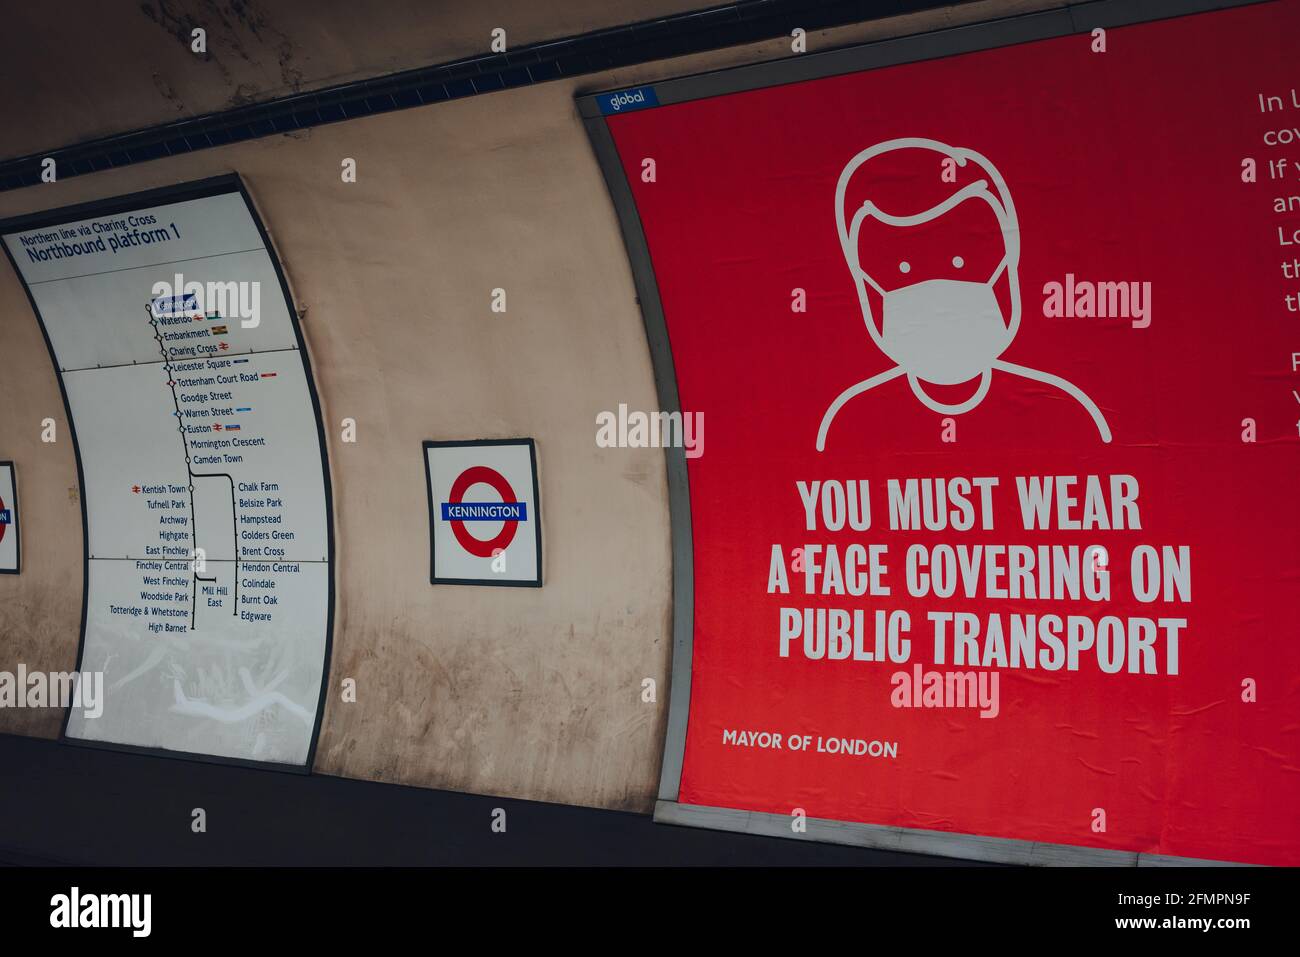 London, UK - May 09, 2021: Face covering requirement sign on the platform of Kennington London Underground Station. The requirements were introduced d Stock Photo